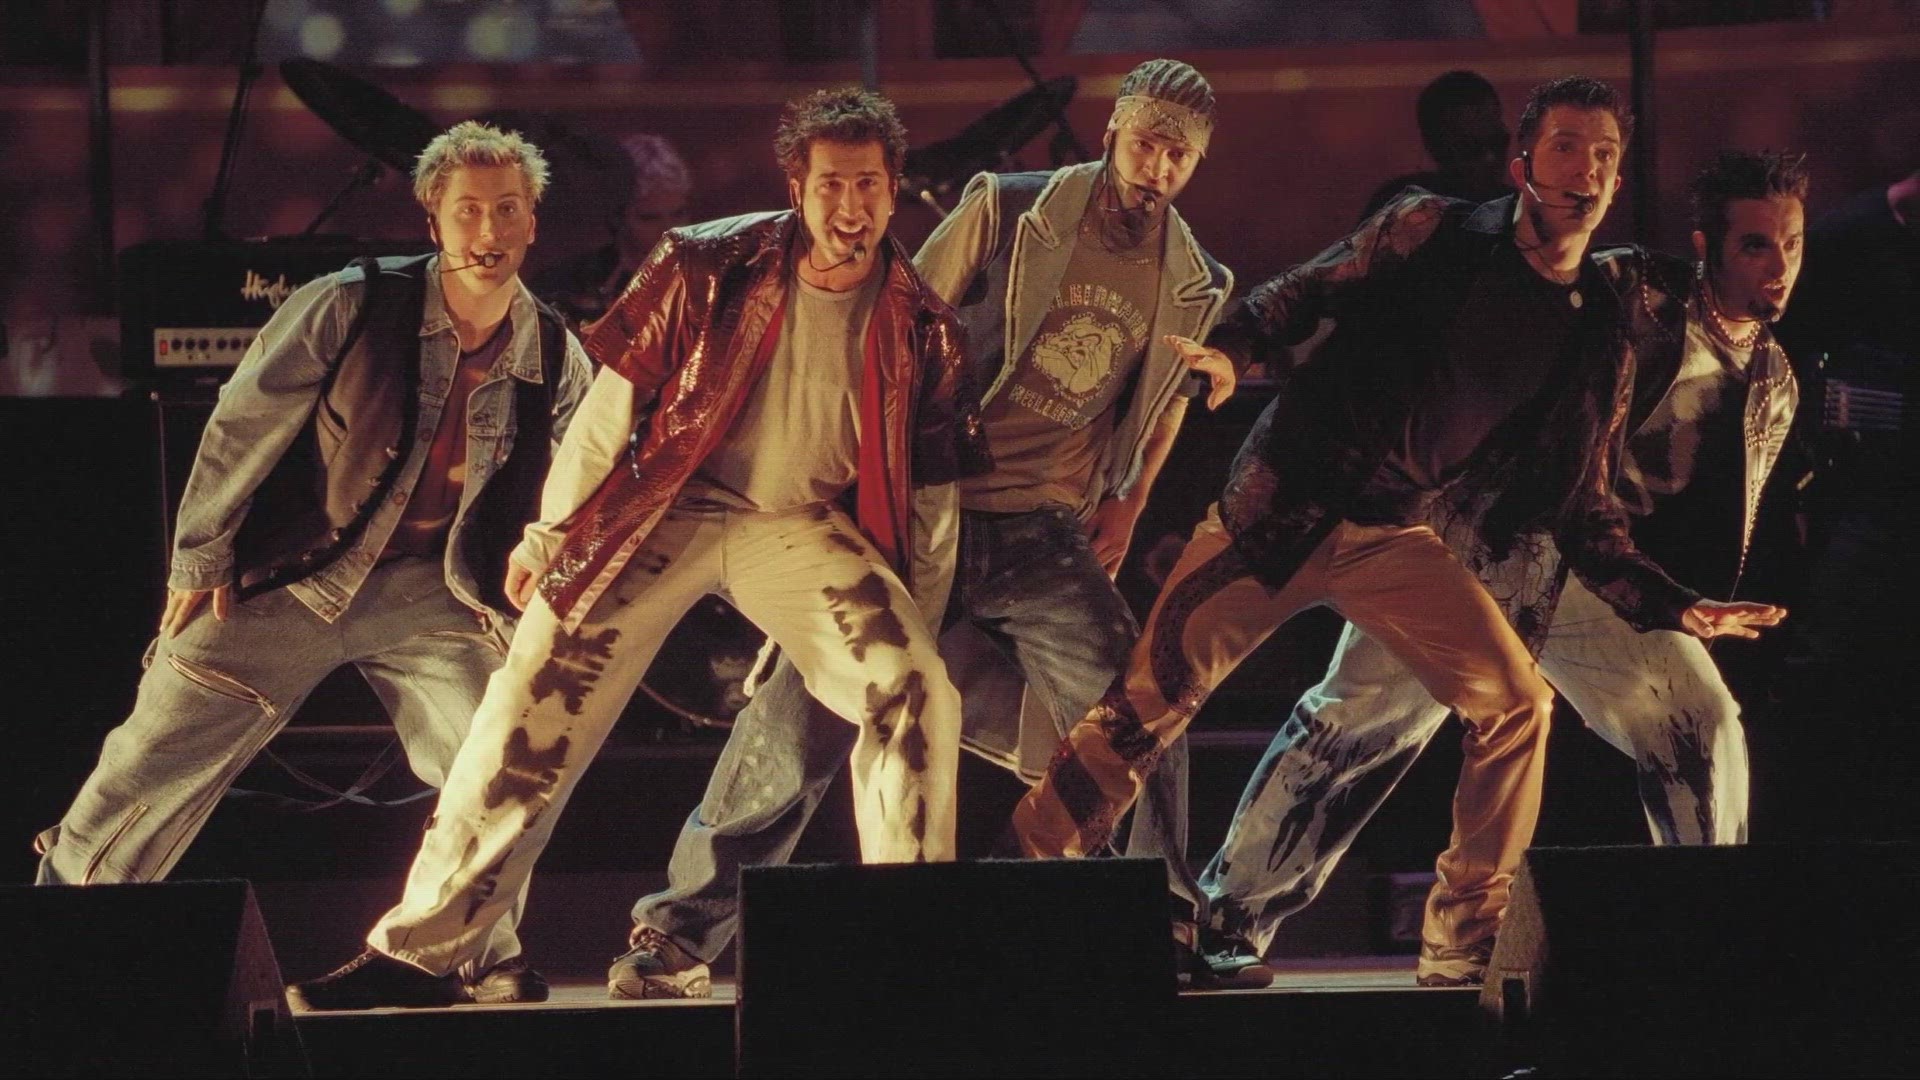 It's official, NSYNC is back with new music.